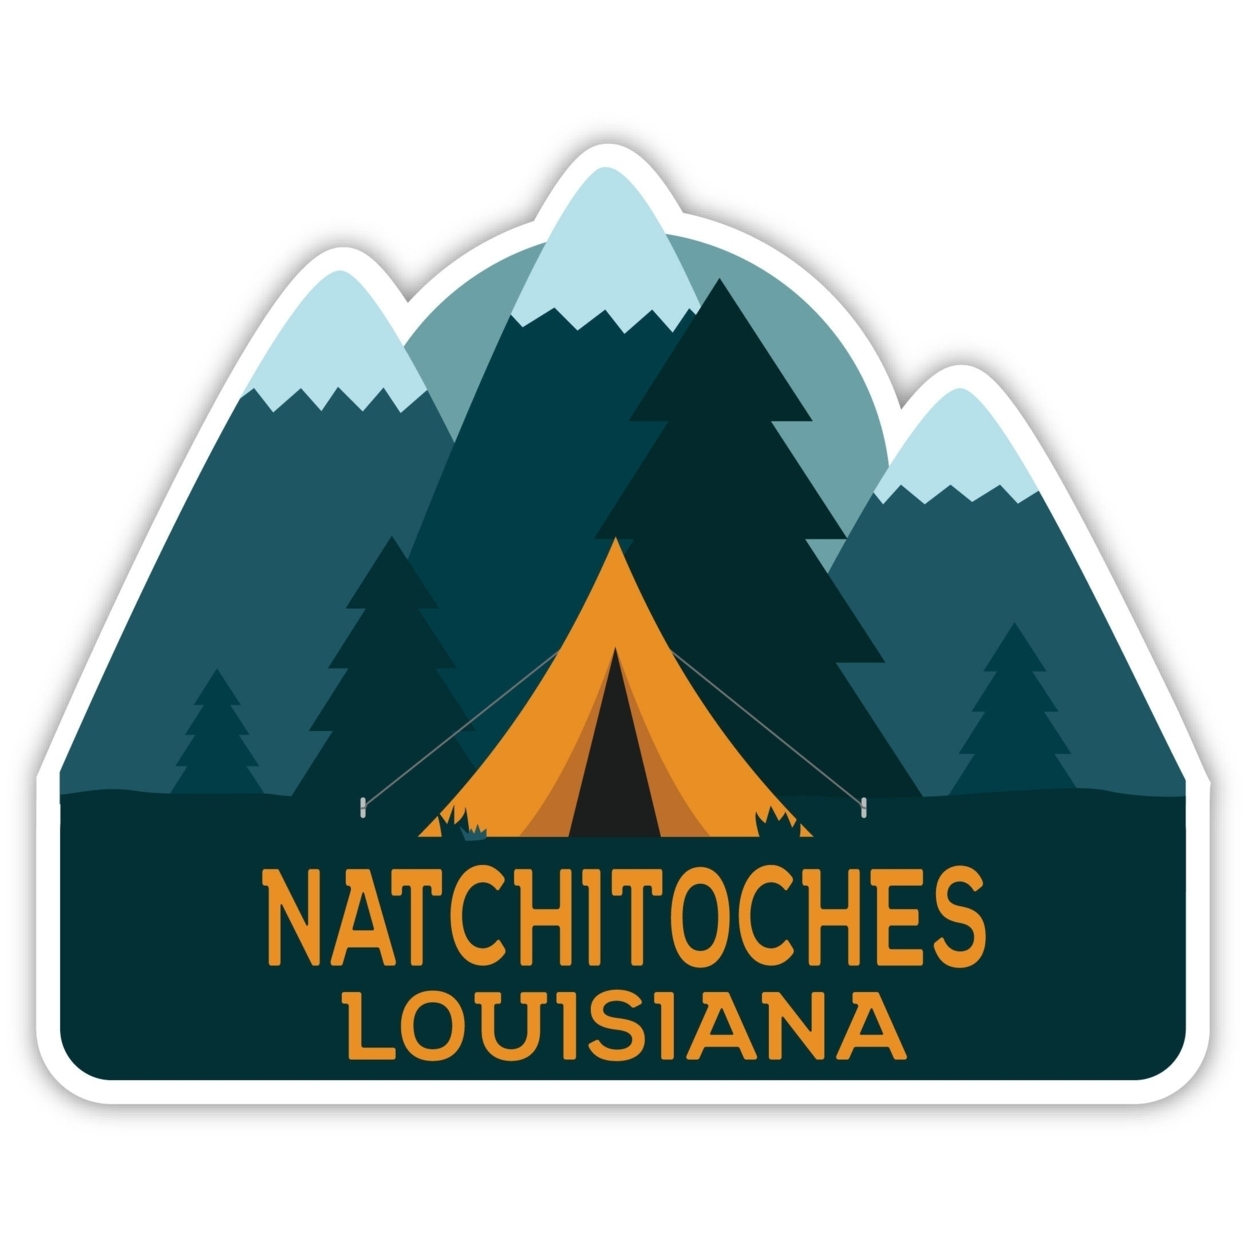 Natchitoches Louisiana Souvenir Decorative Stickers (Choose Theme And Size) - Single Unit, 4-Inch, Tent